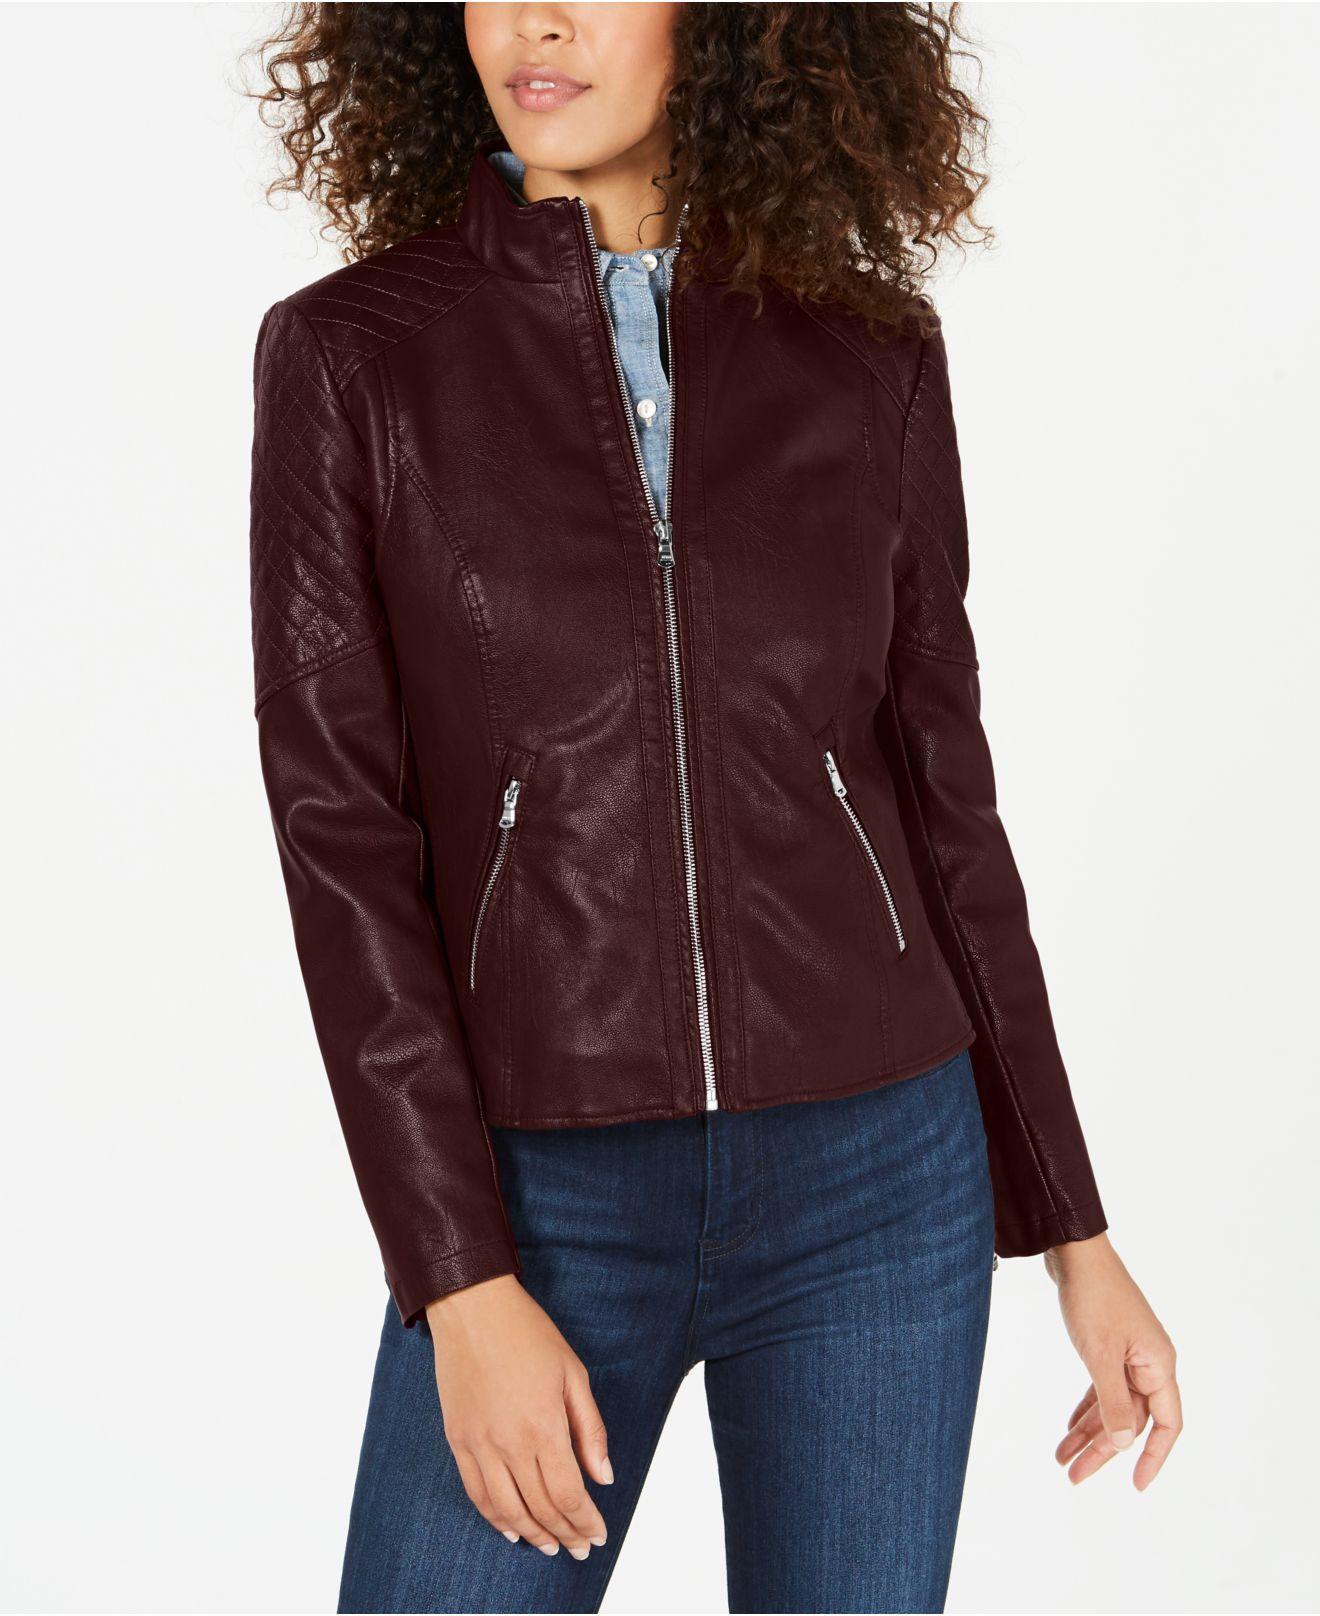 guess maroon leather jacket